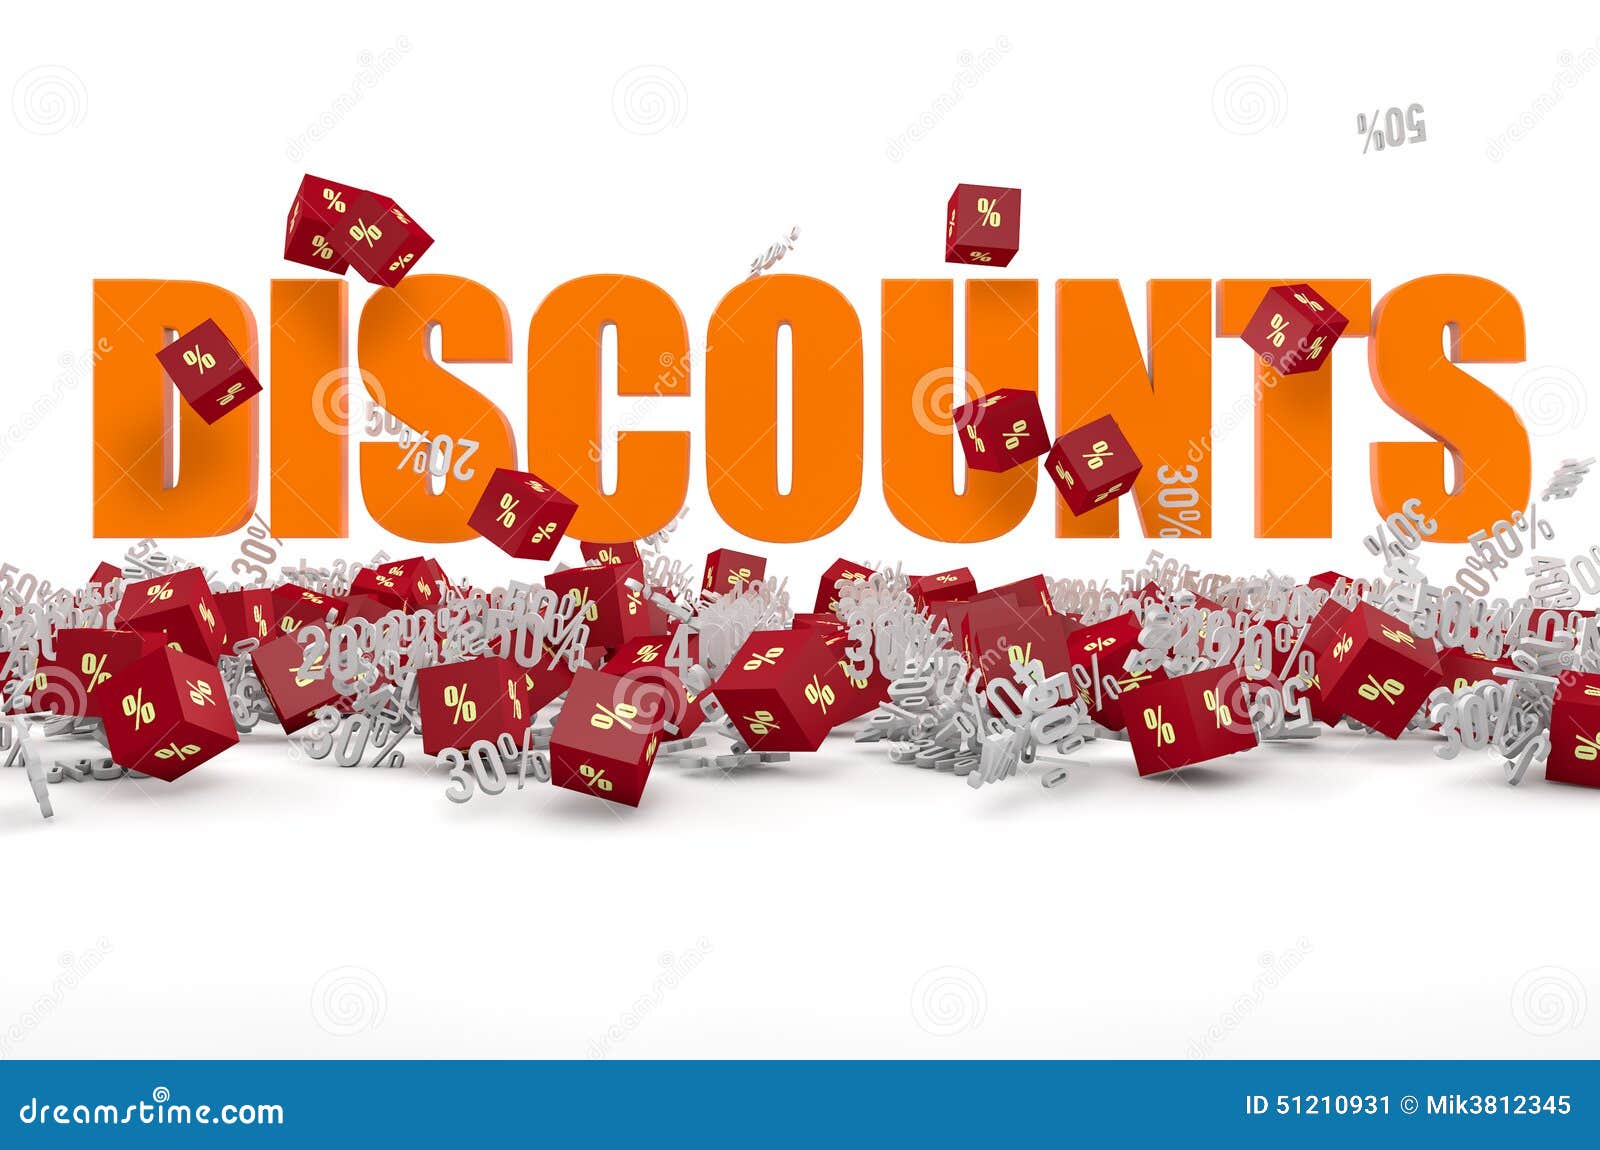 discounts text and cubes